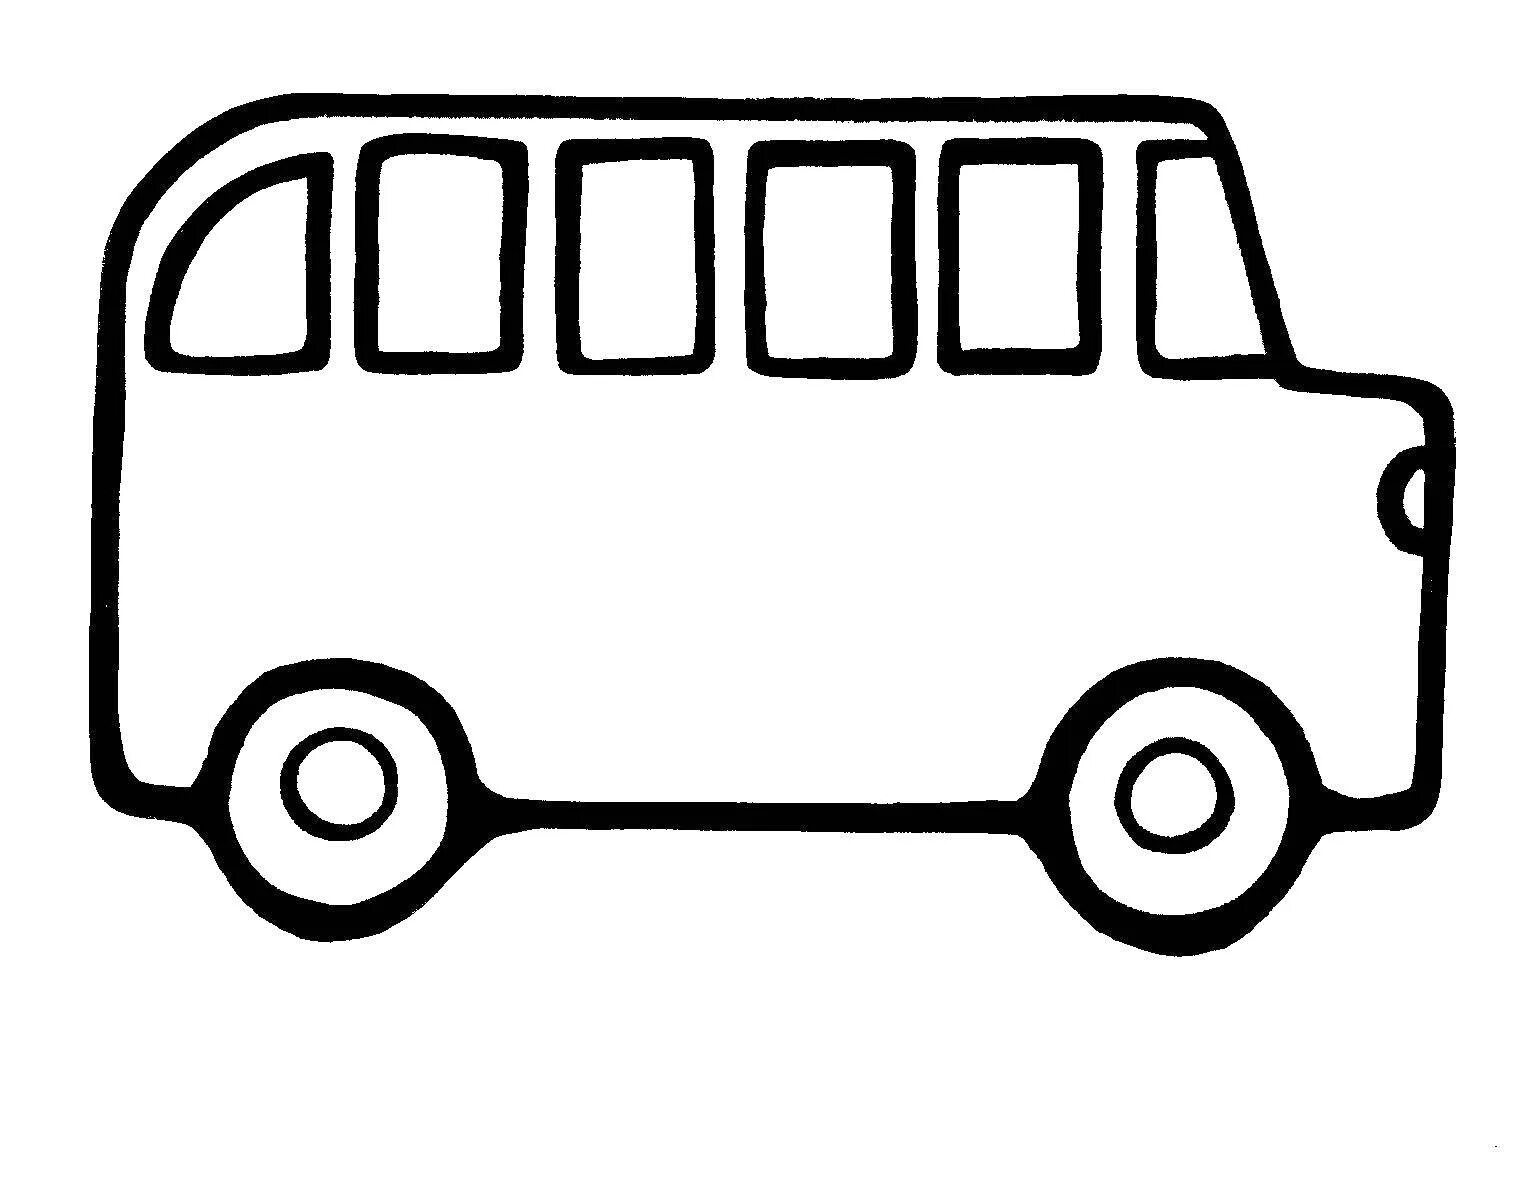 Coloring page cute bus for kids 2-3 years old